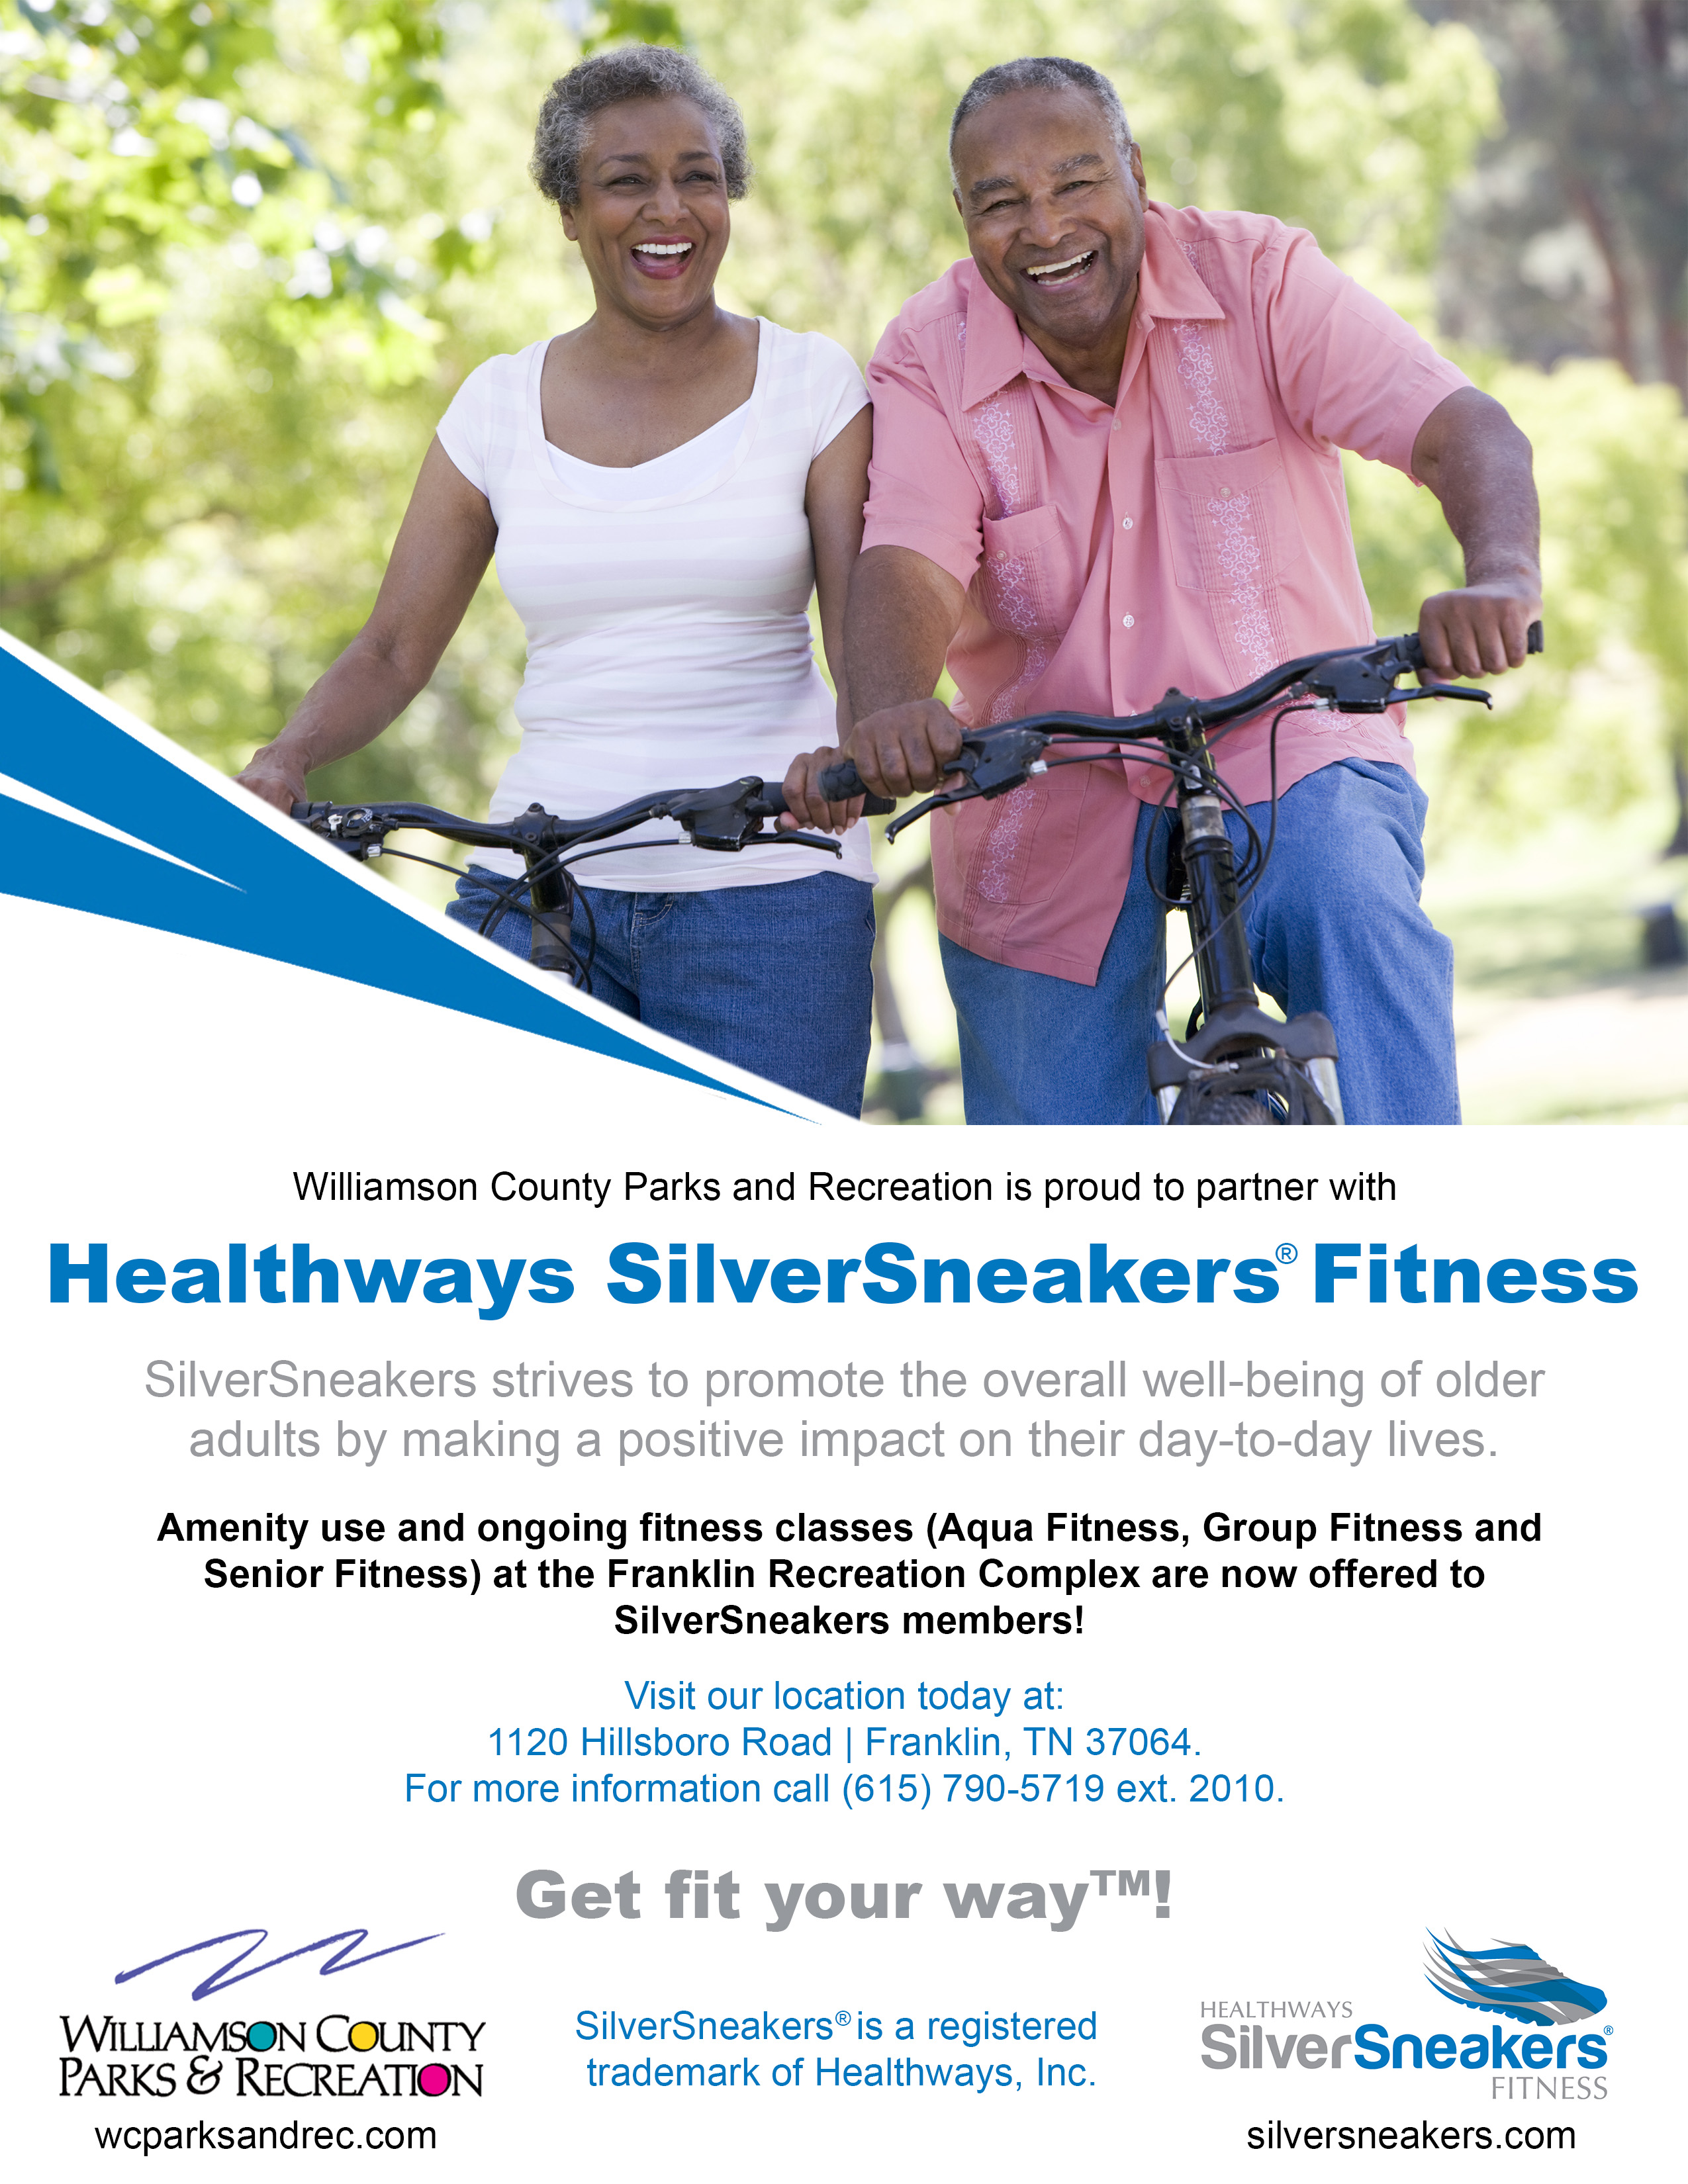 What is SilverSneakers by Healthways?